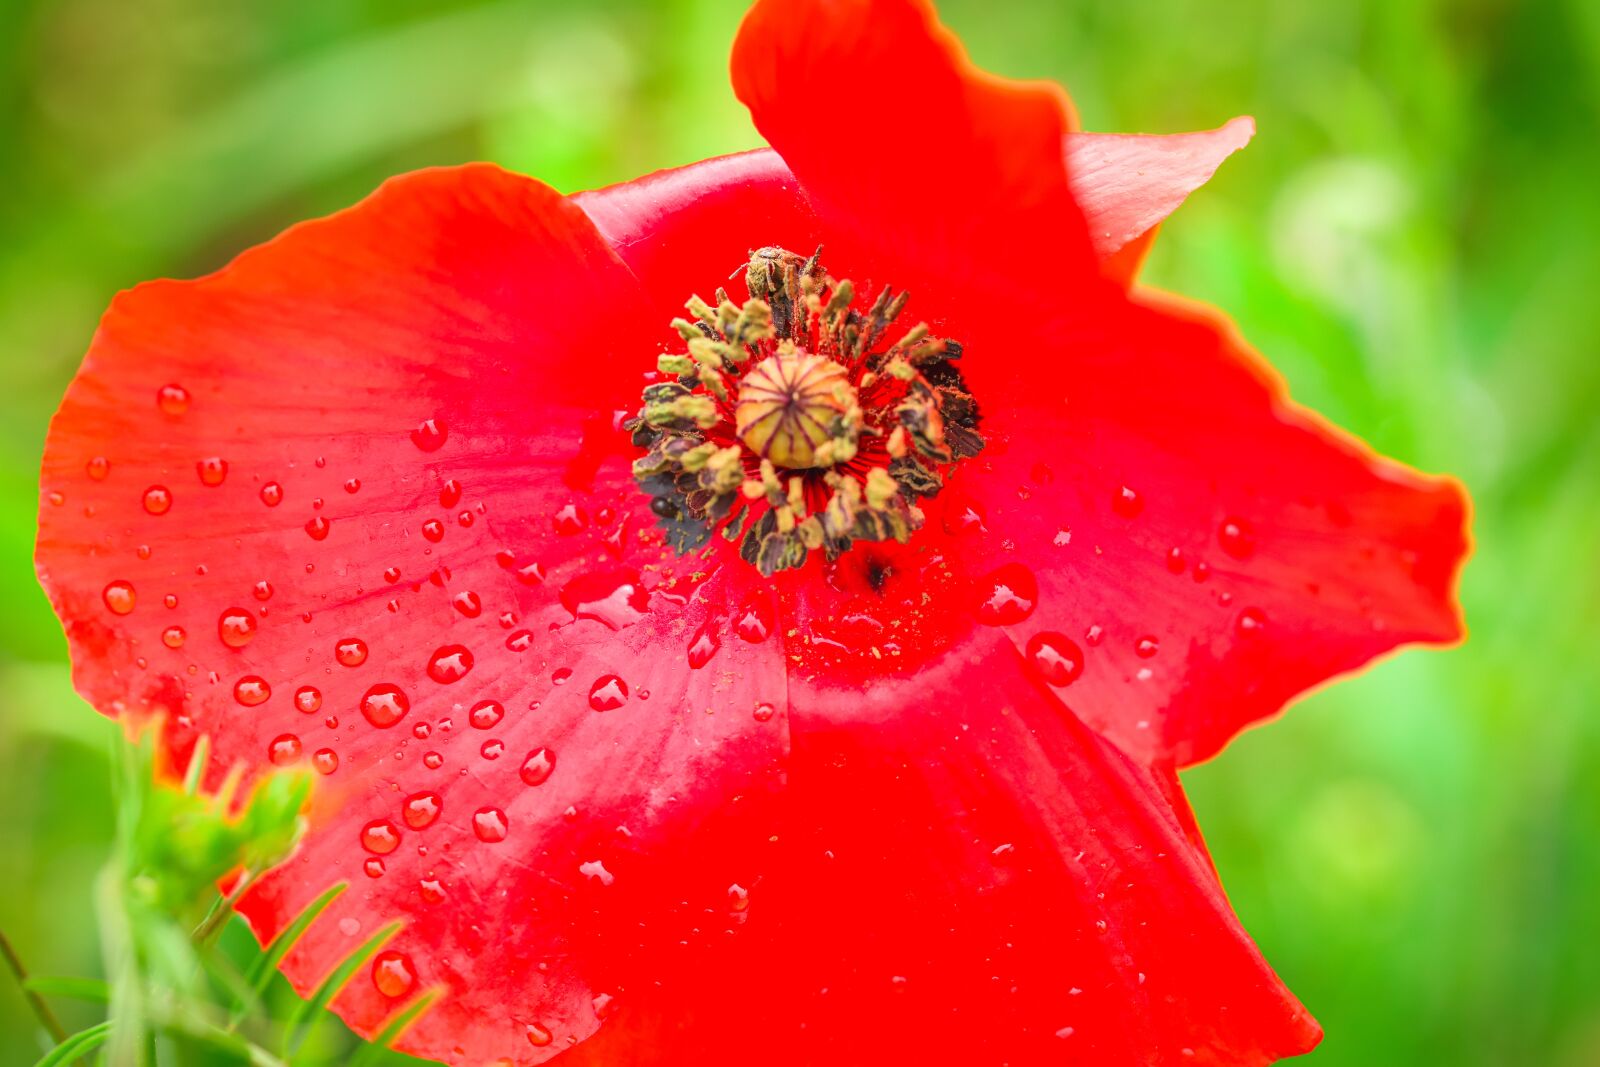 Canon TAMRON SP 90mm F/2.8 Di VC USD MACRO1:1 F004 sample photo. Poppy, mother's day, spring photography